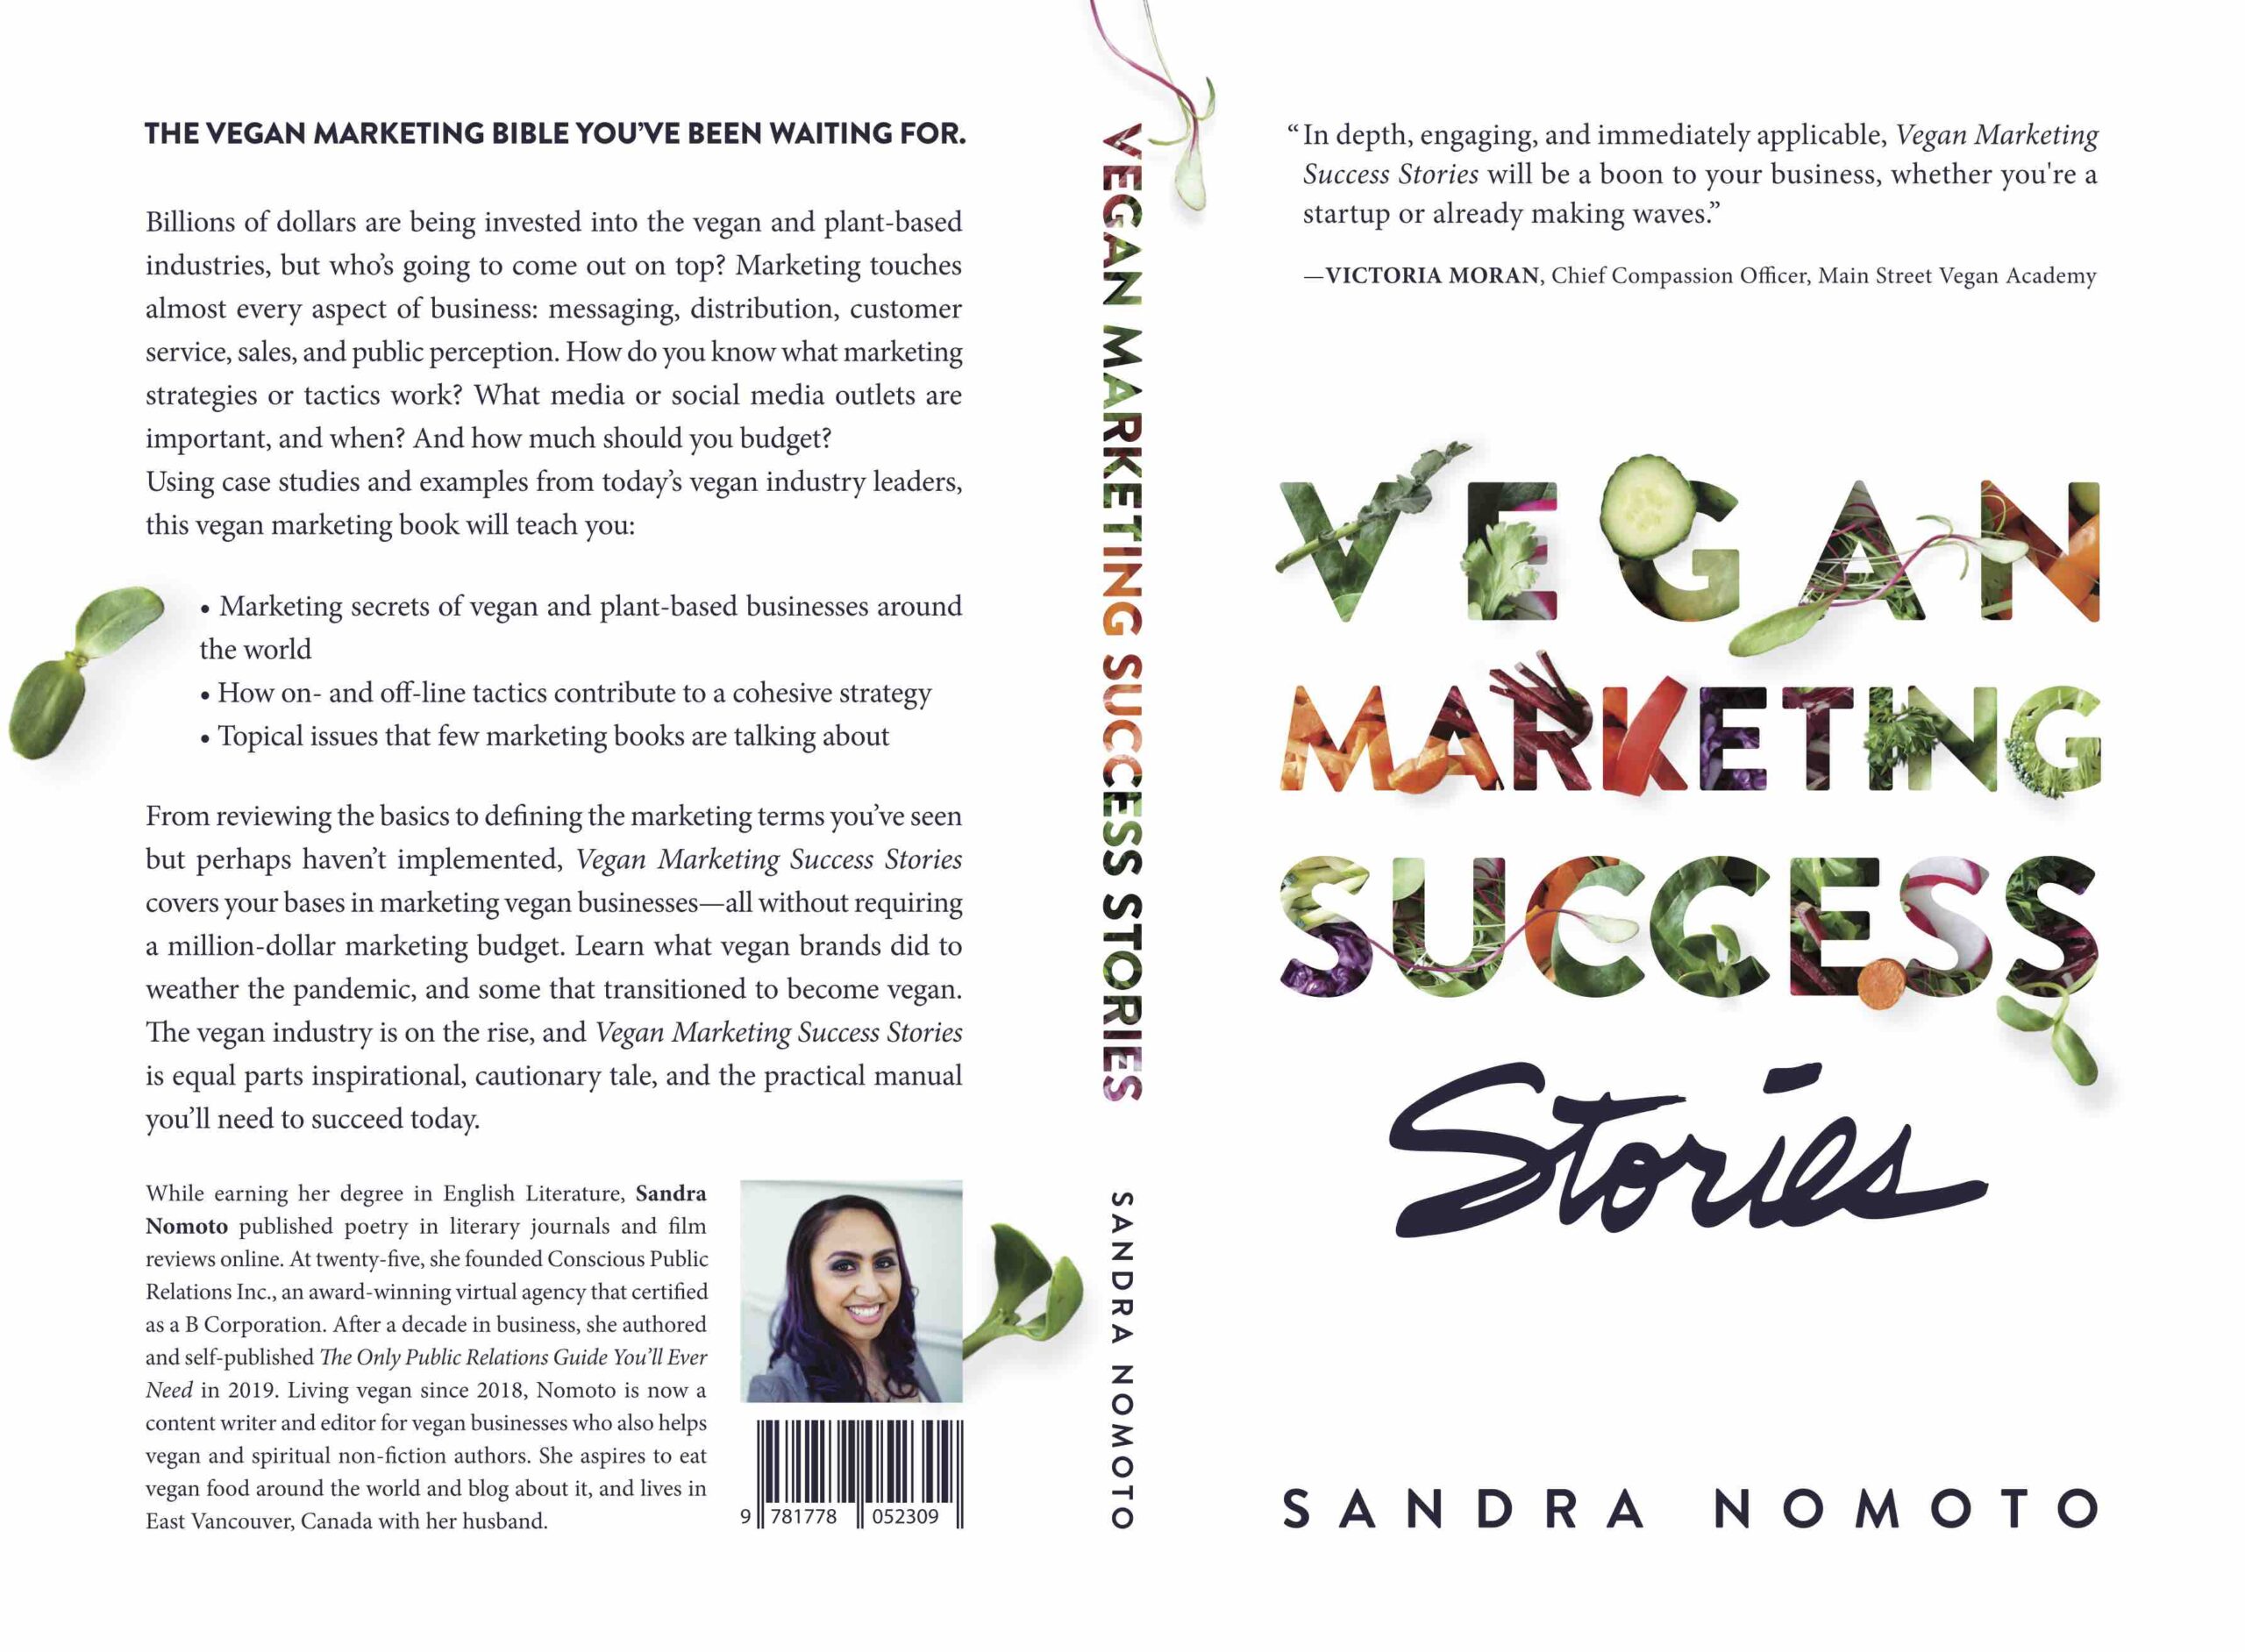 Front and back cover of Sandra Nomoto's Vegan Marketing Success Stories